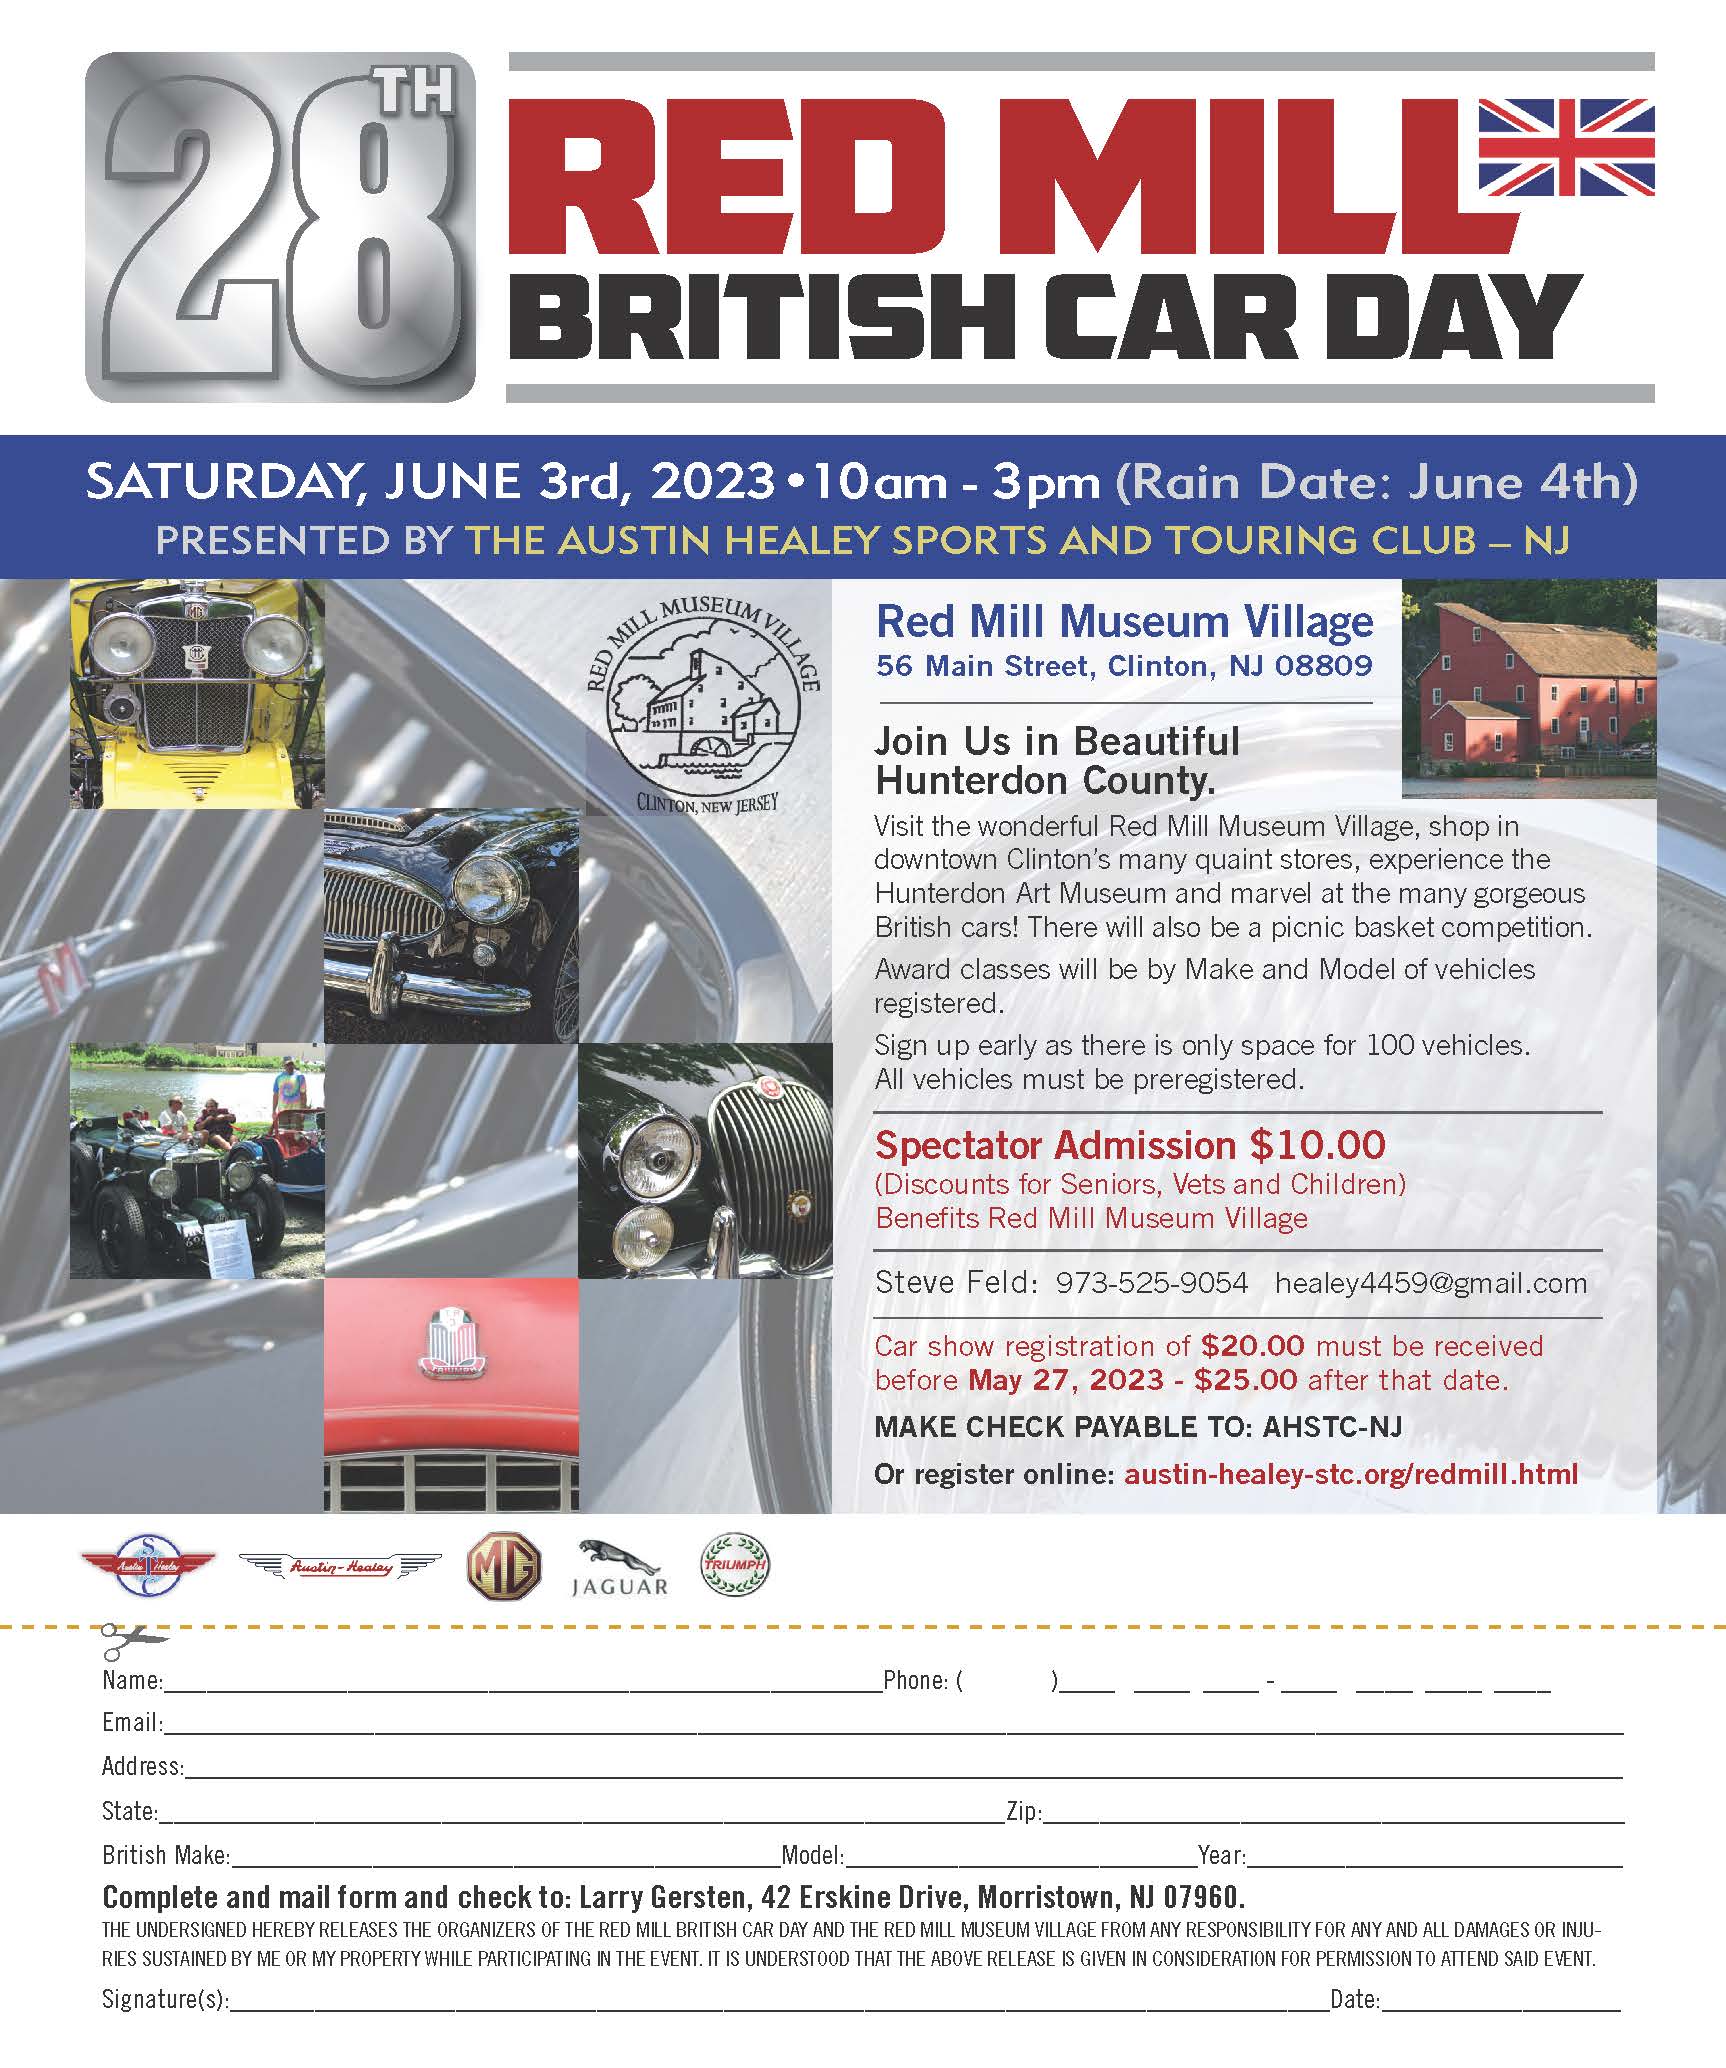 28th Red Mill British Car Day @ Red Mill Museum Village